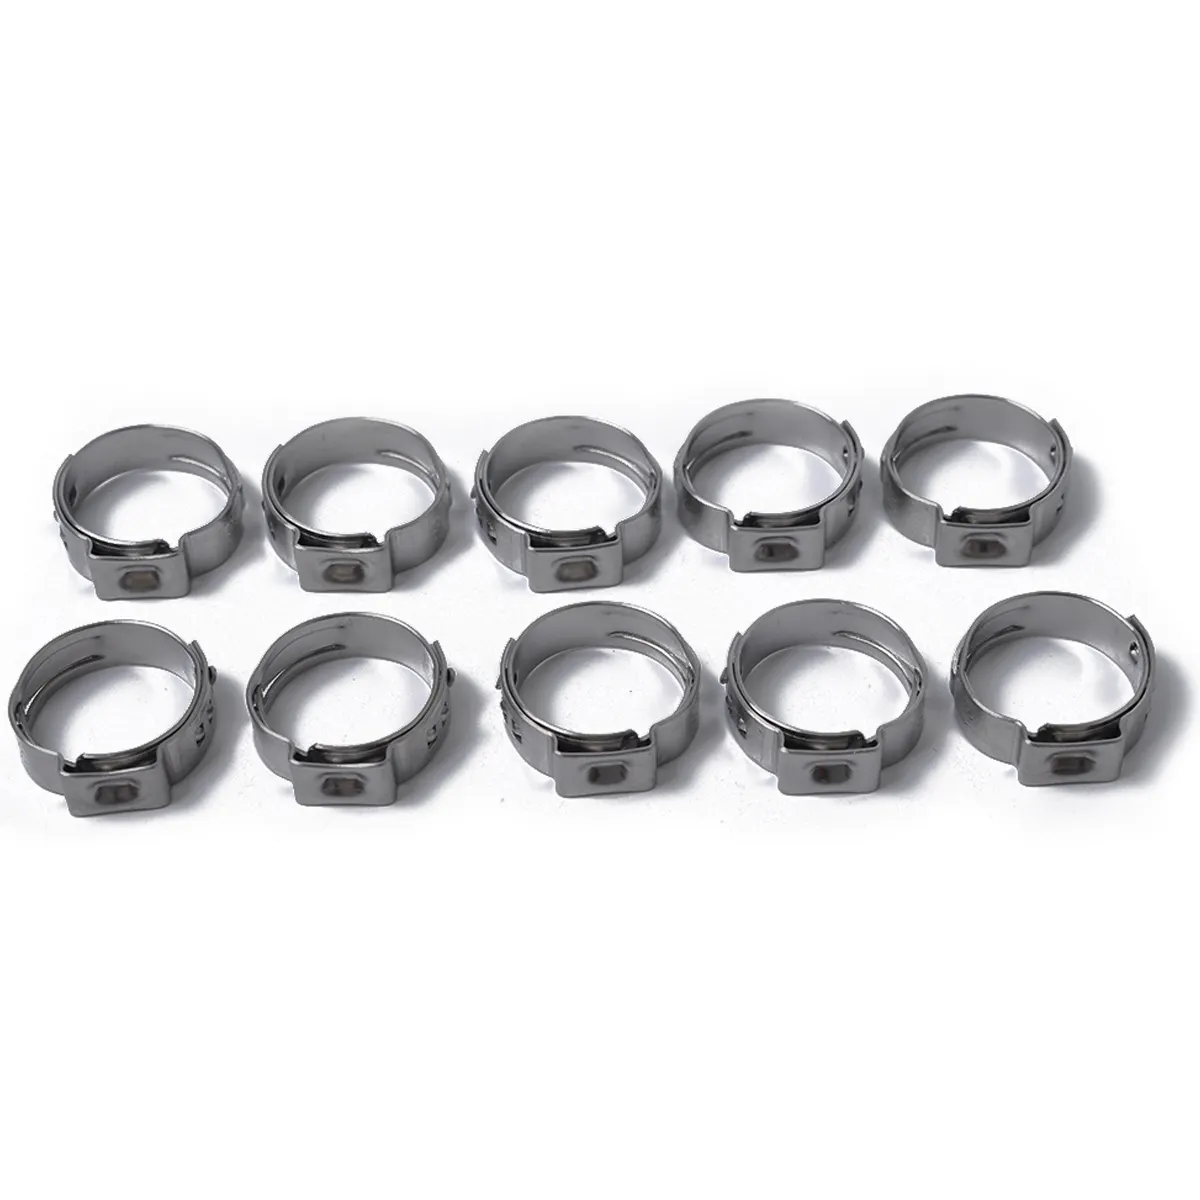 Pack 10 9.4-11.9mm Single Ear Stainless Steel Clamps Wholesale Price at BAJUTU for Car Hose/Shopify,Amazon,Ebay,Wish Hot Seller